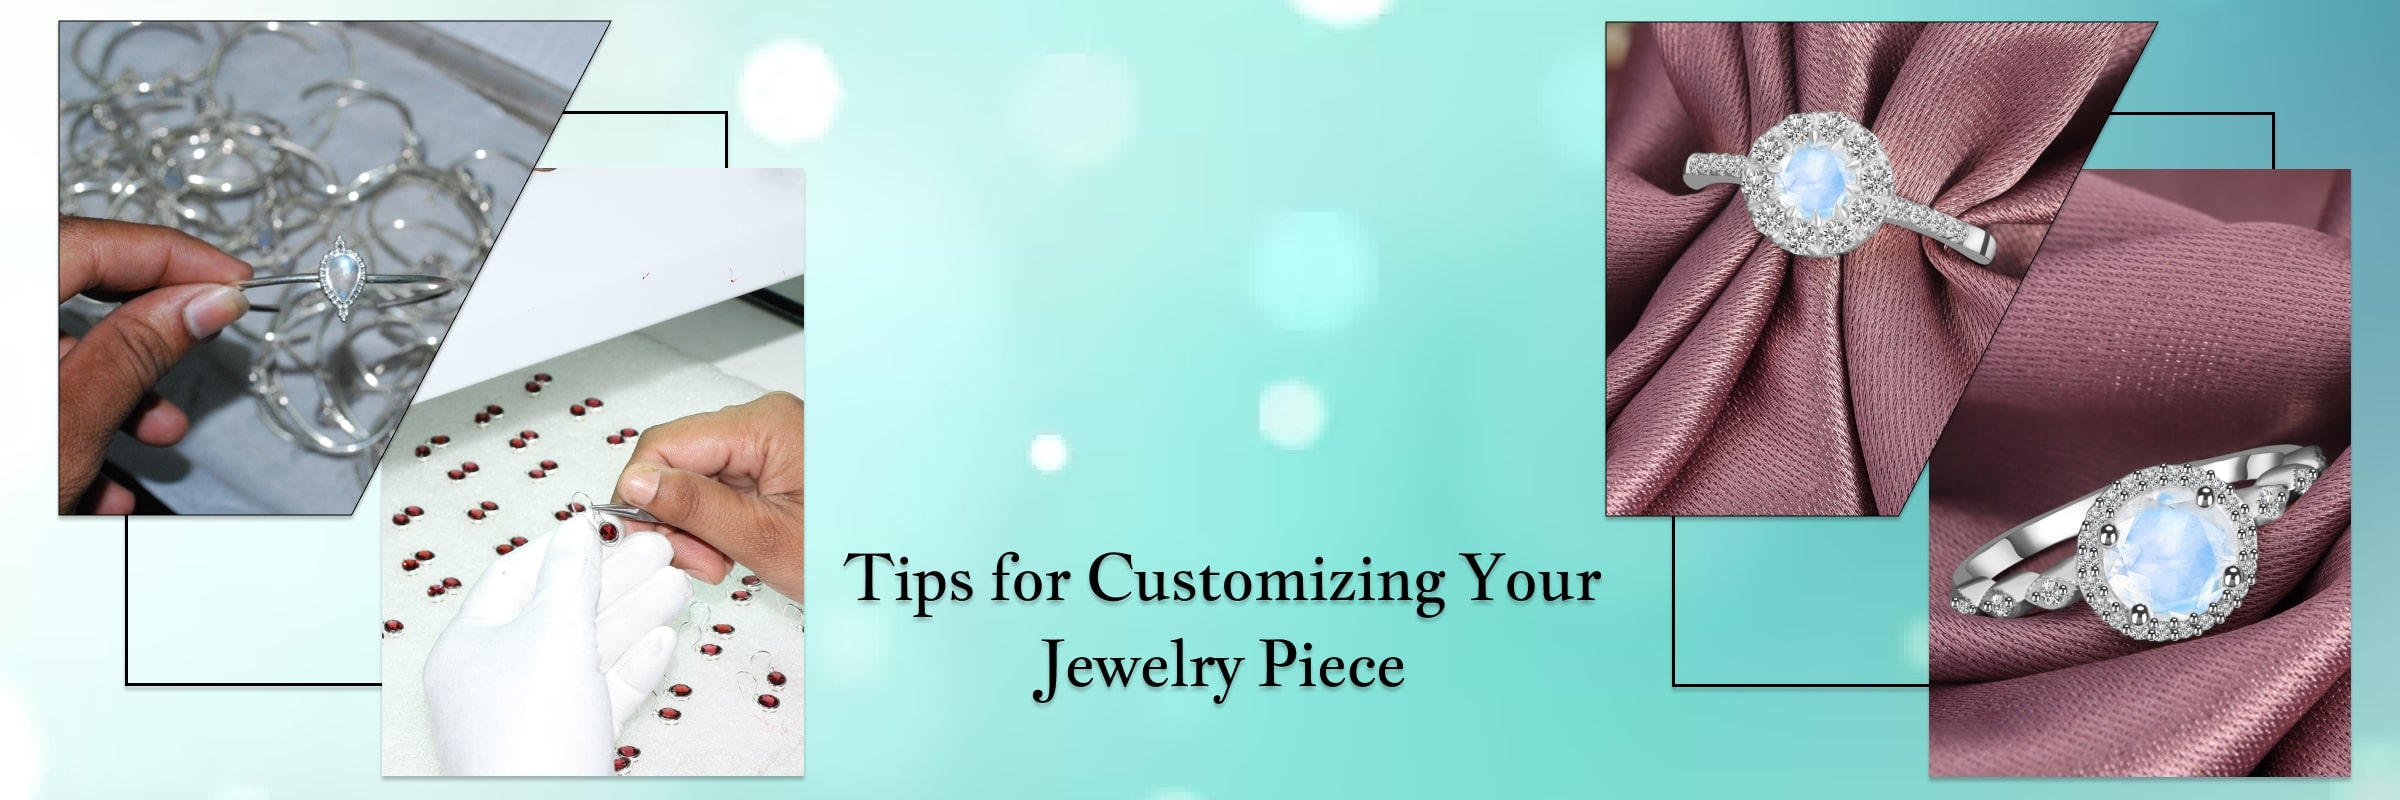 What You Should Know Before Customizing Jewelry